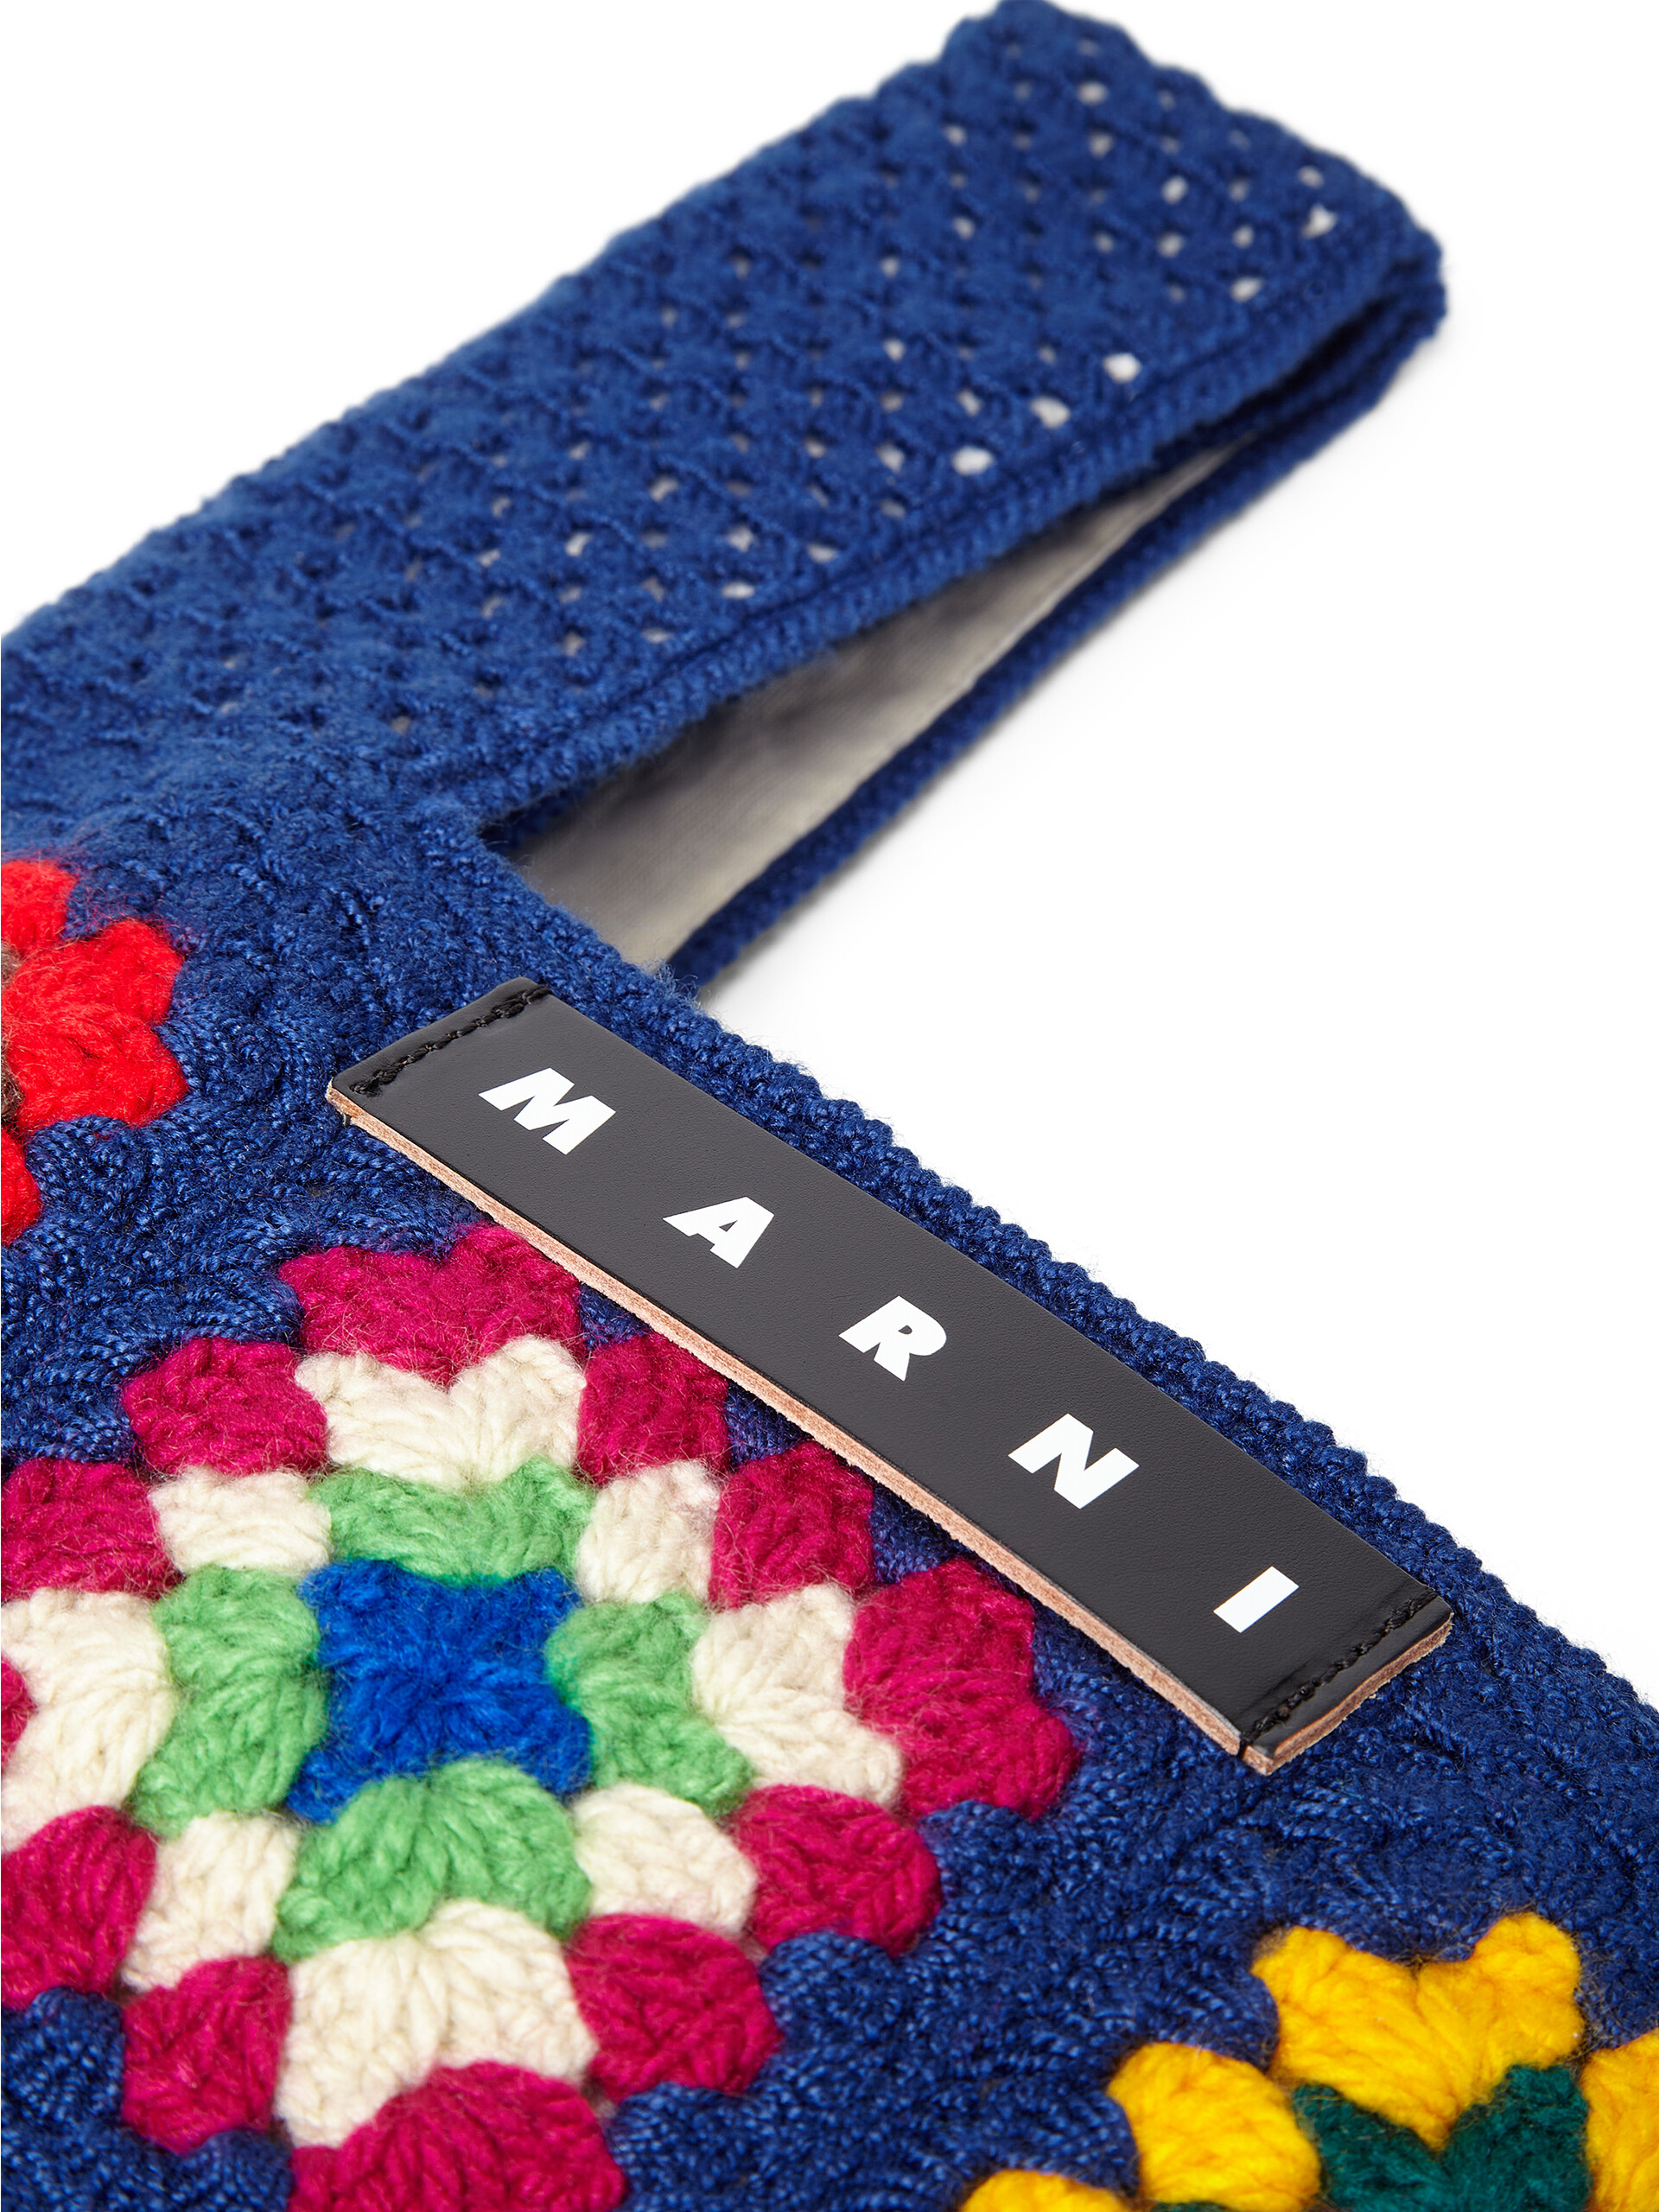 Shopping bag MARNI MARKET with patchwork floral motif in blue crochet polyester - Bags - Image 4